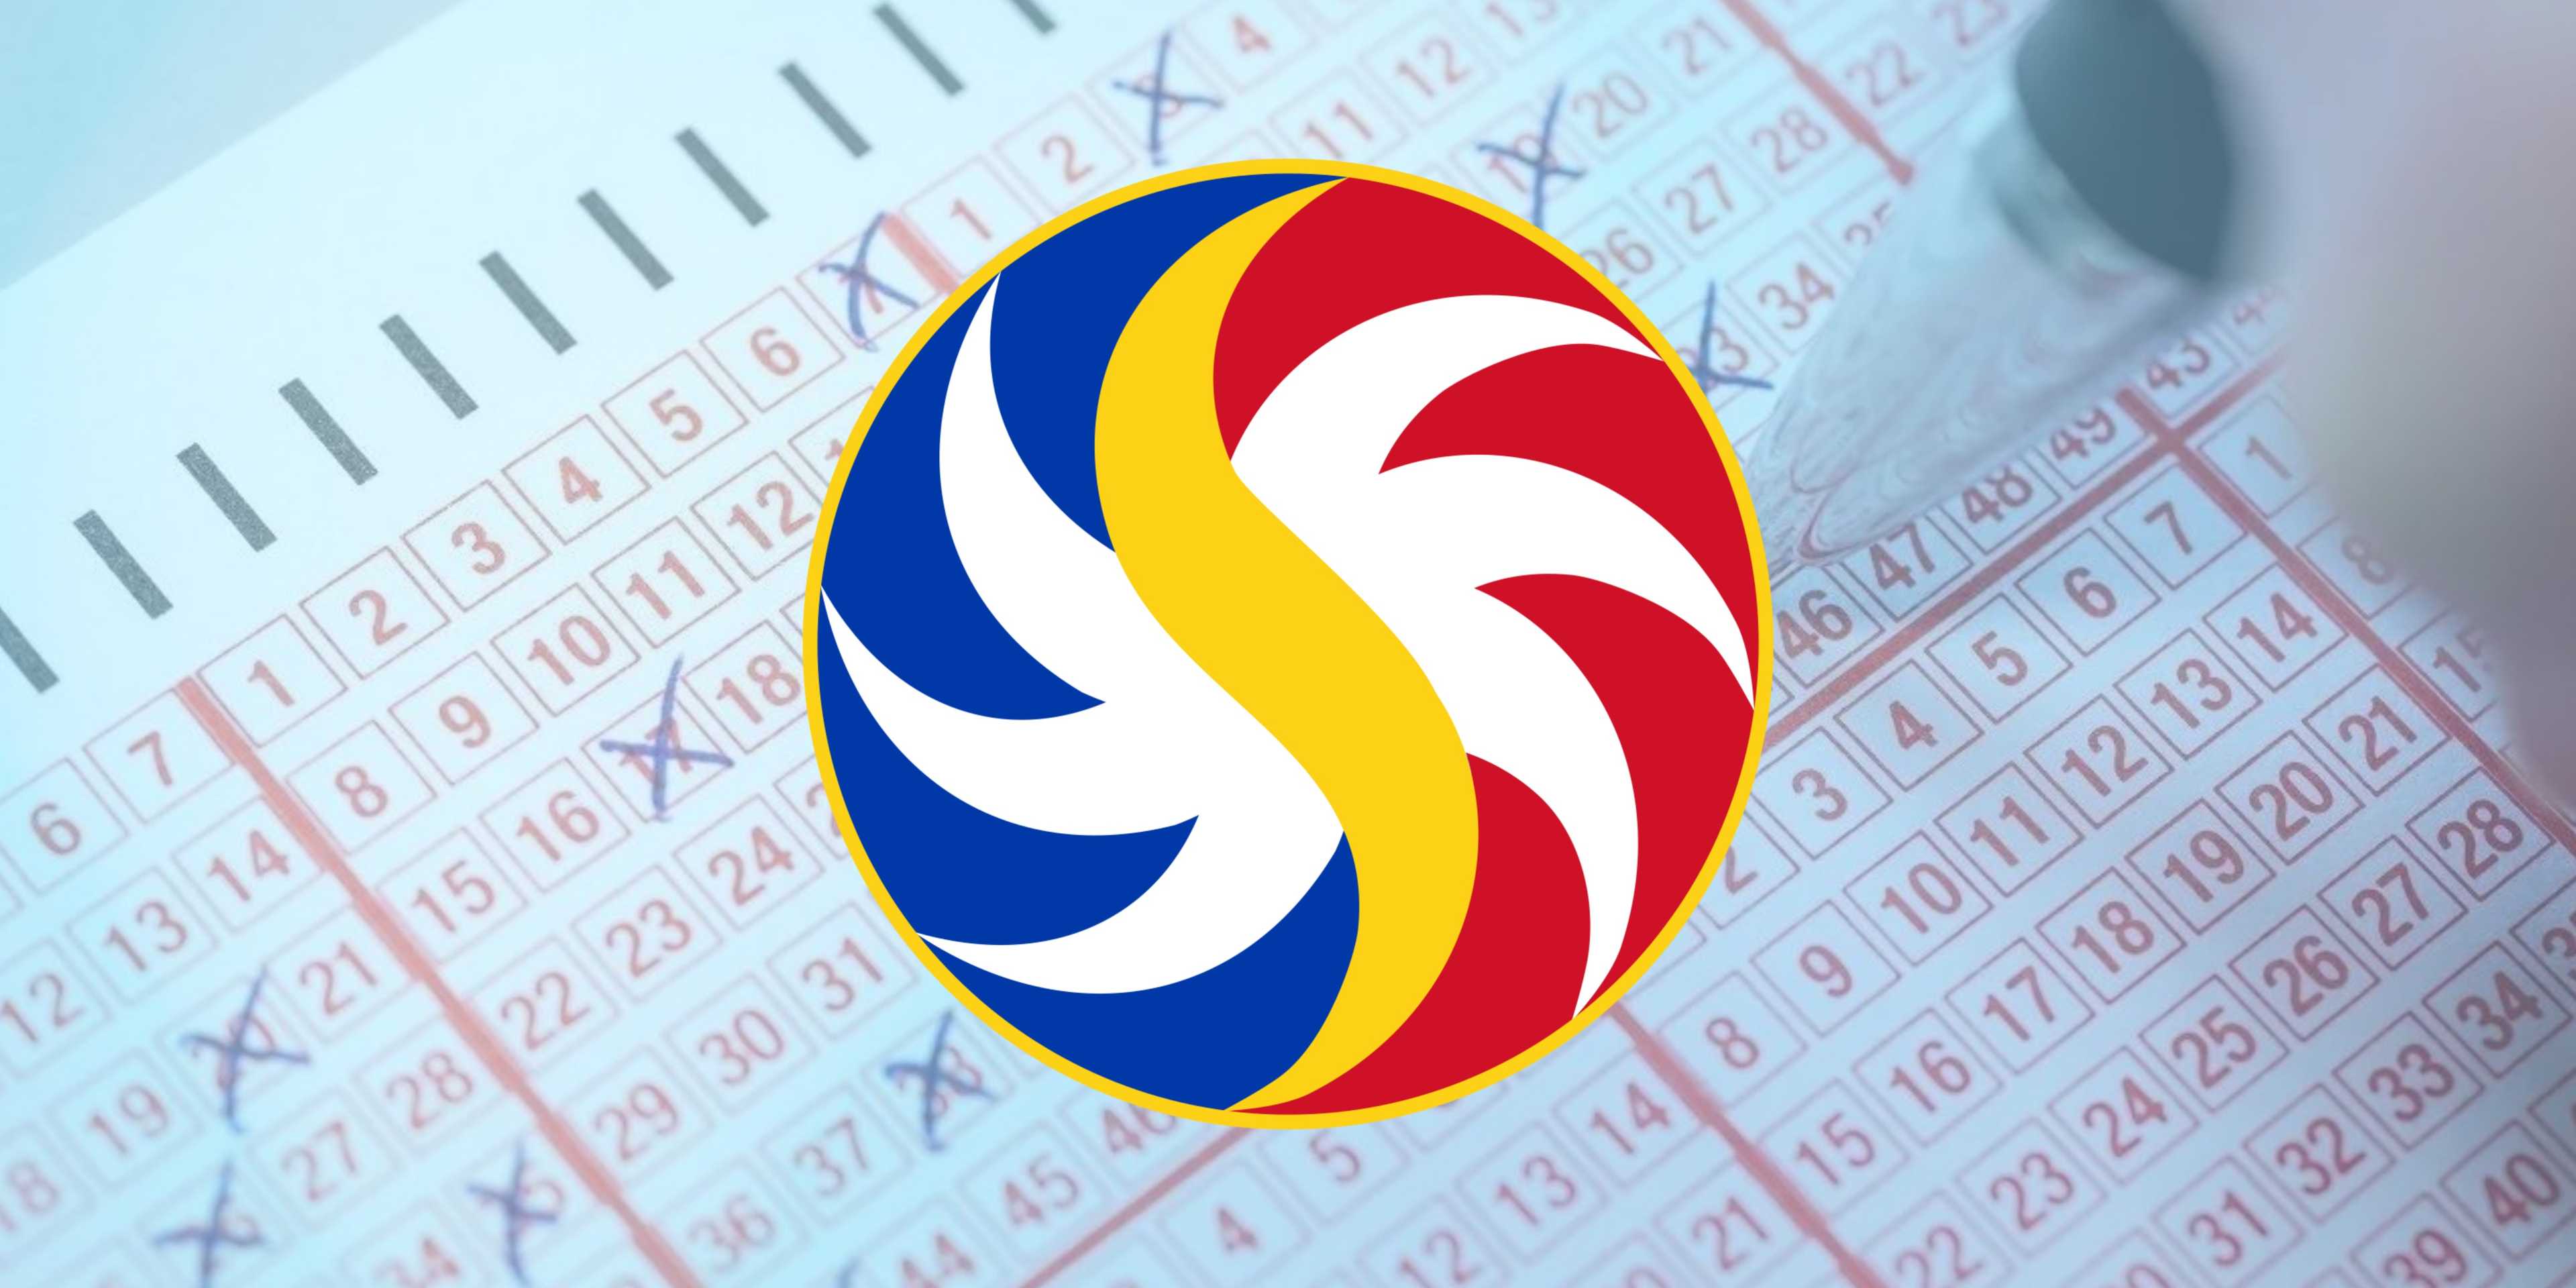 PCSO Lotto Draw Results on Thursday, January 25